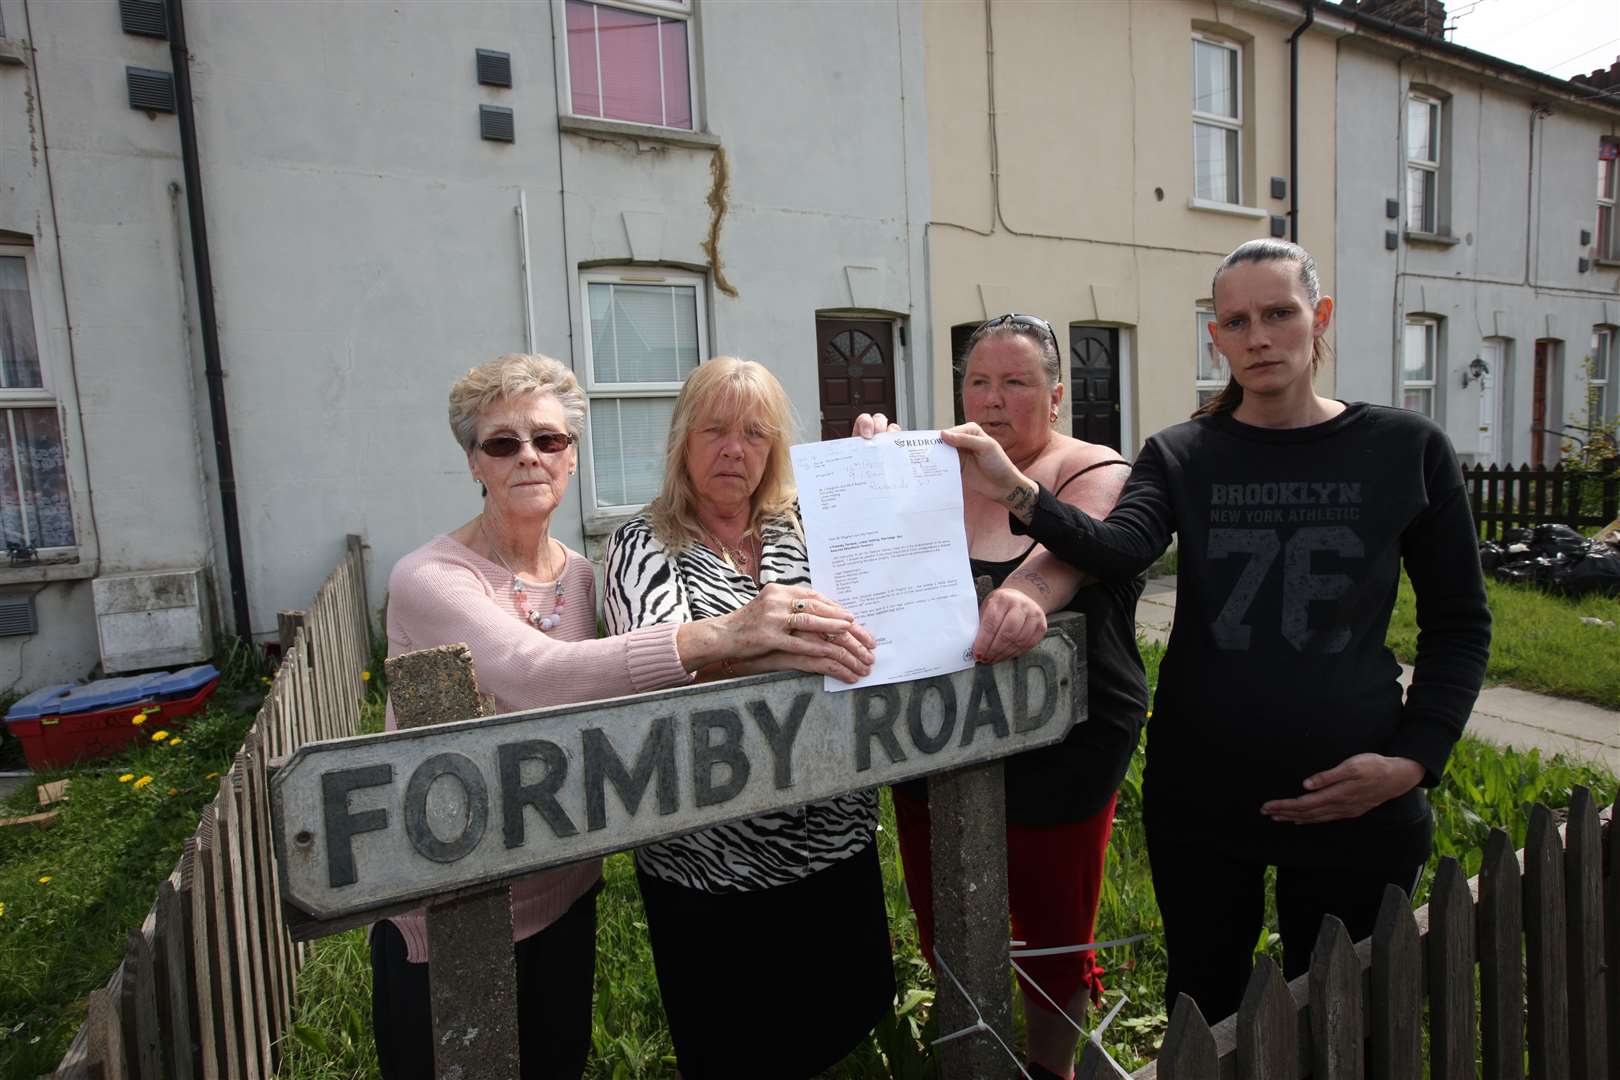 Tenants were evicted from Formby Terrace, next door to the site, in 2015